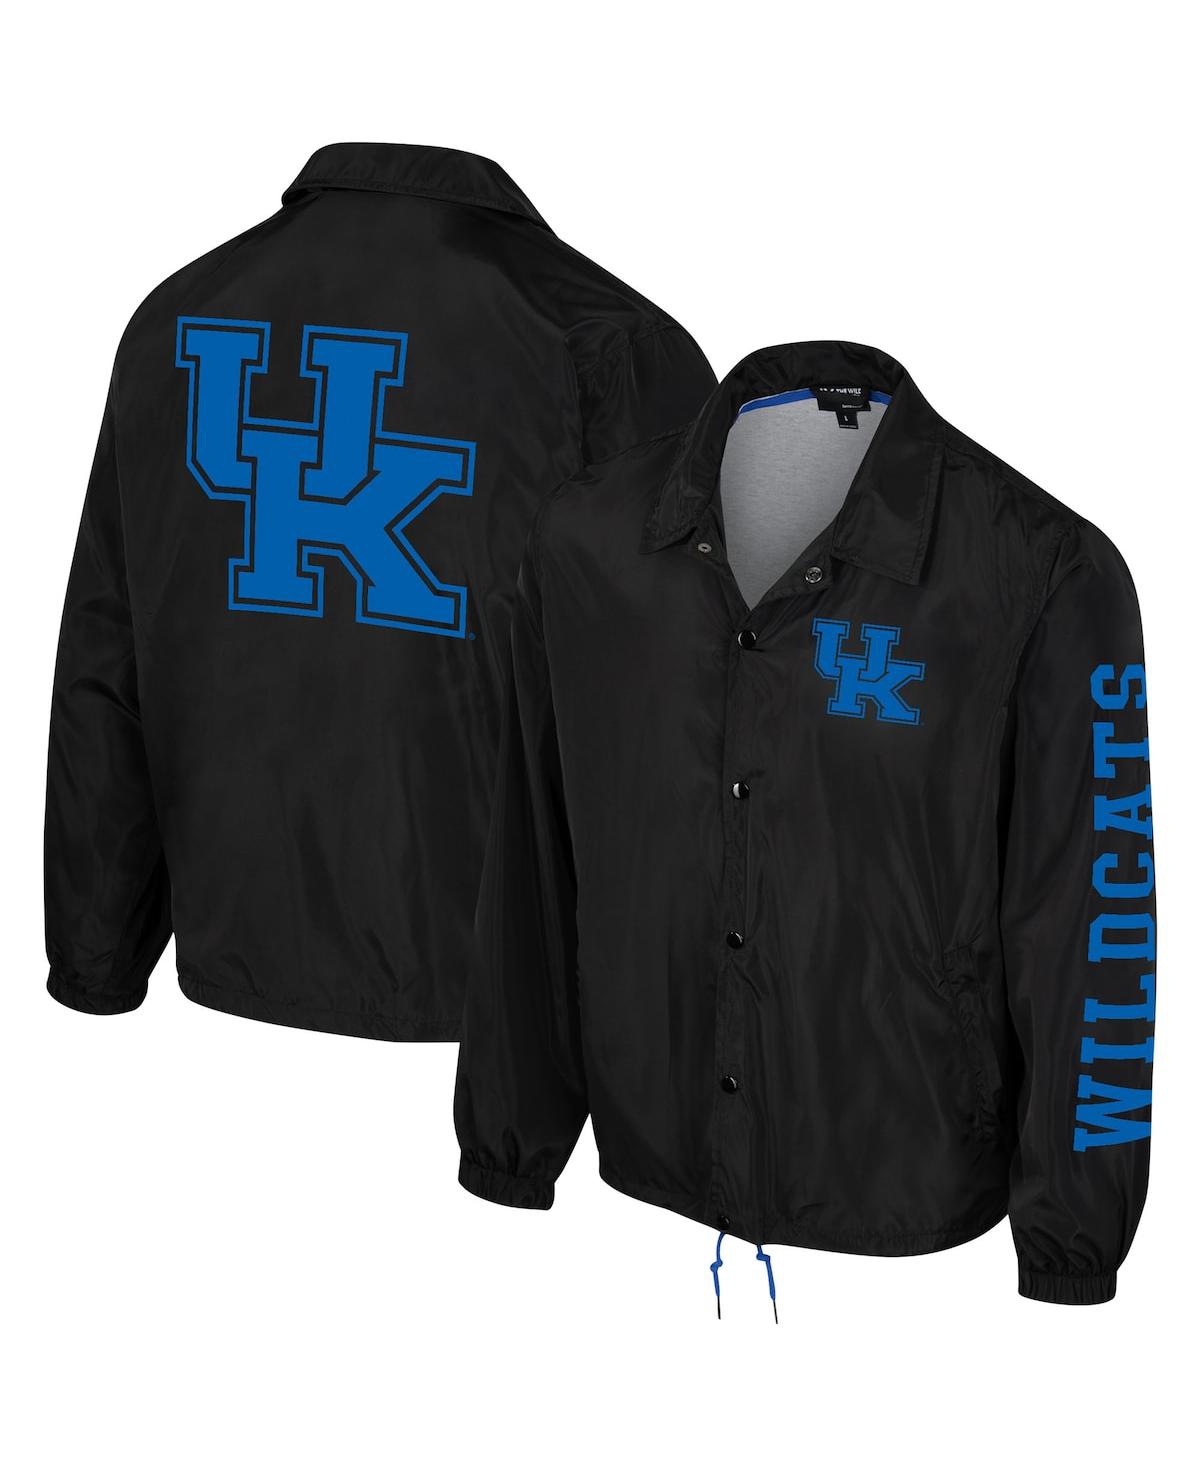 Men's and Women's The Wild Collective Black Kentucky Wildcats Coaches Full-Snap Jacket - Black